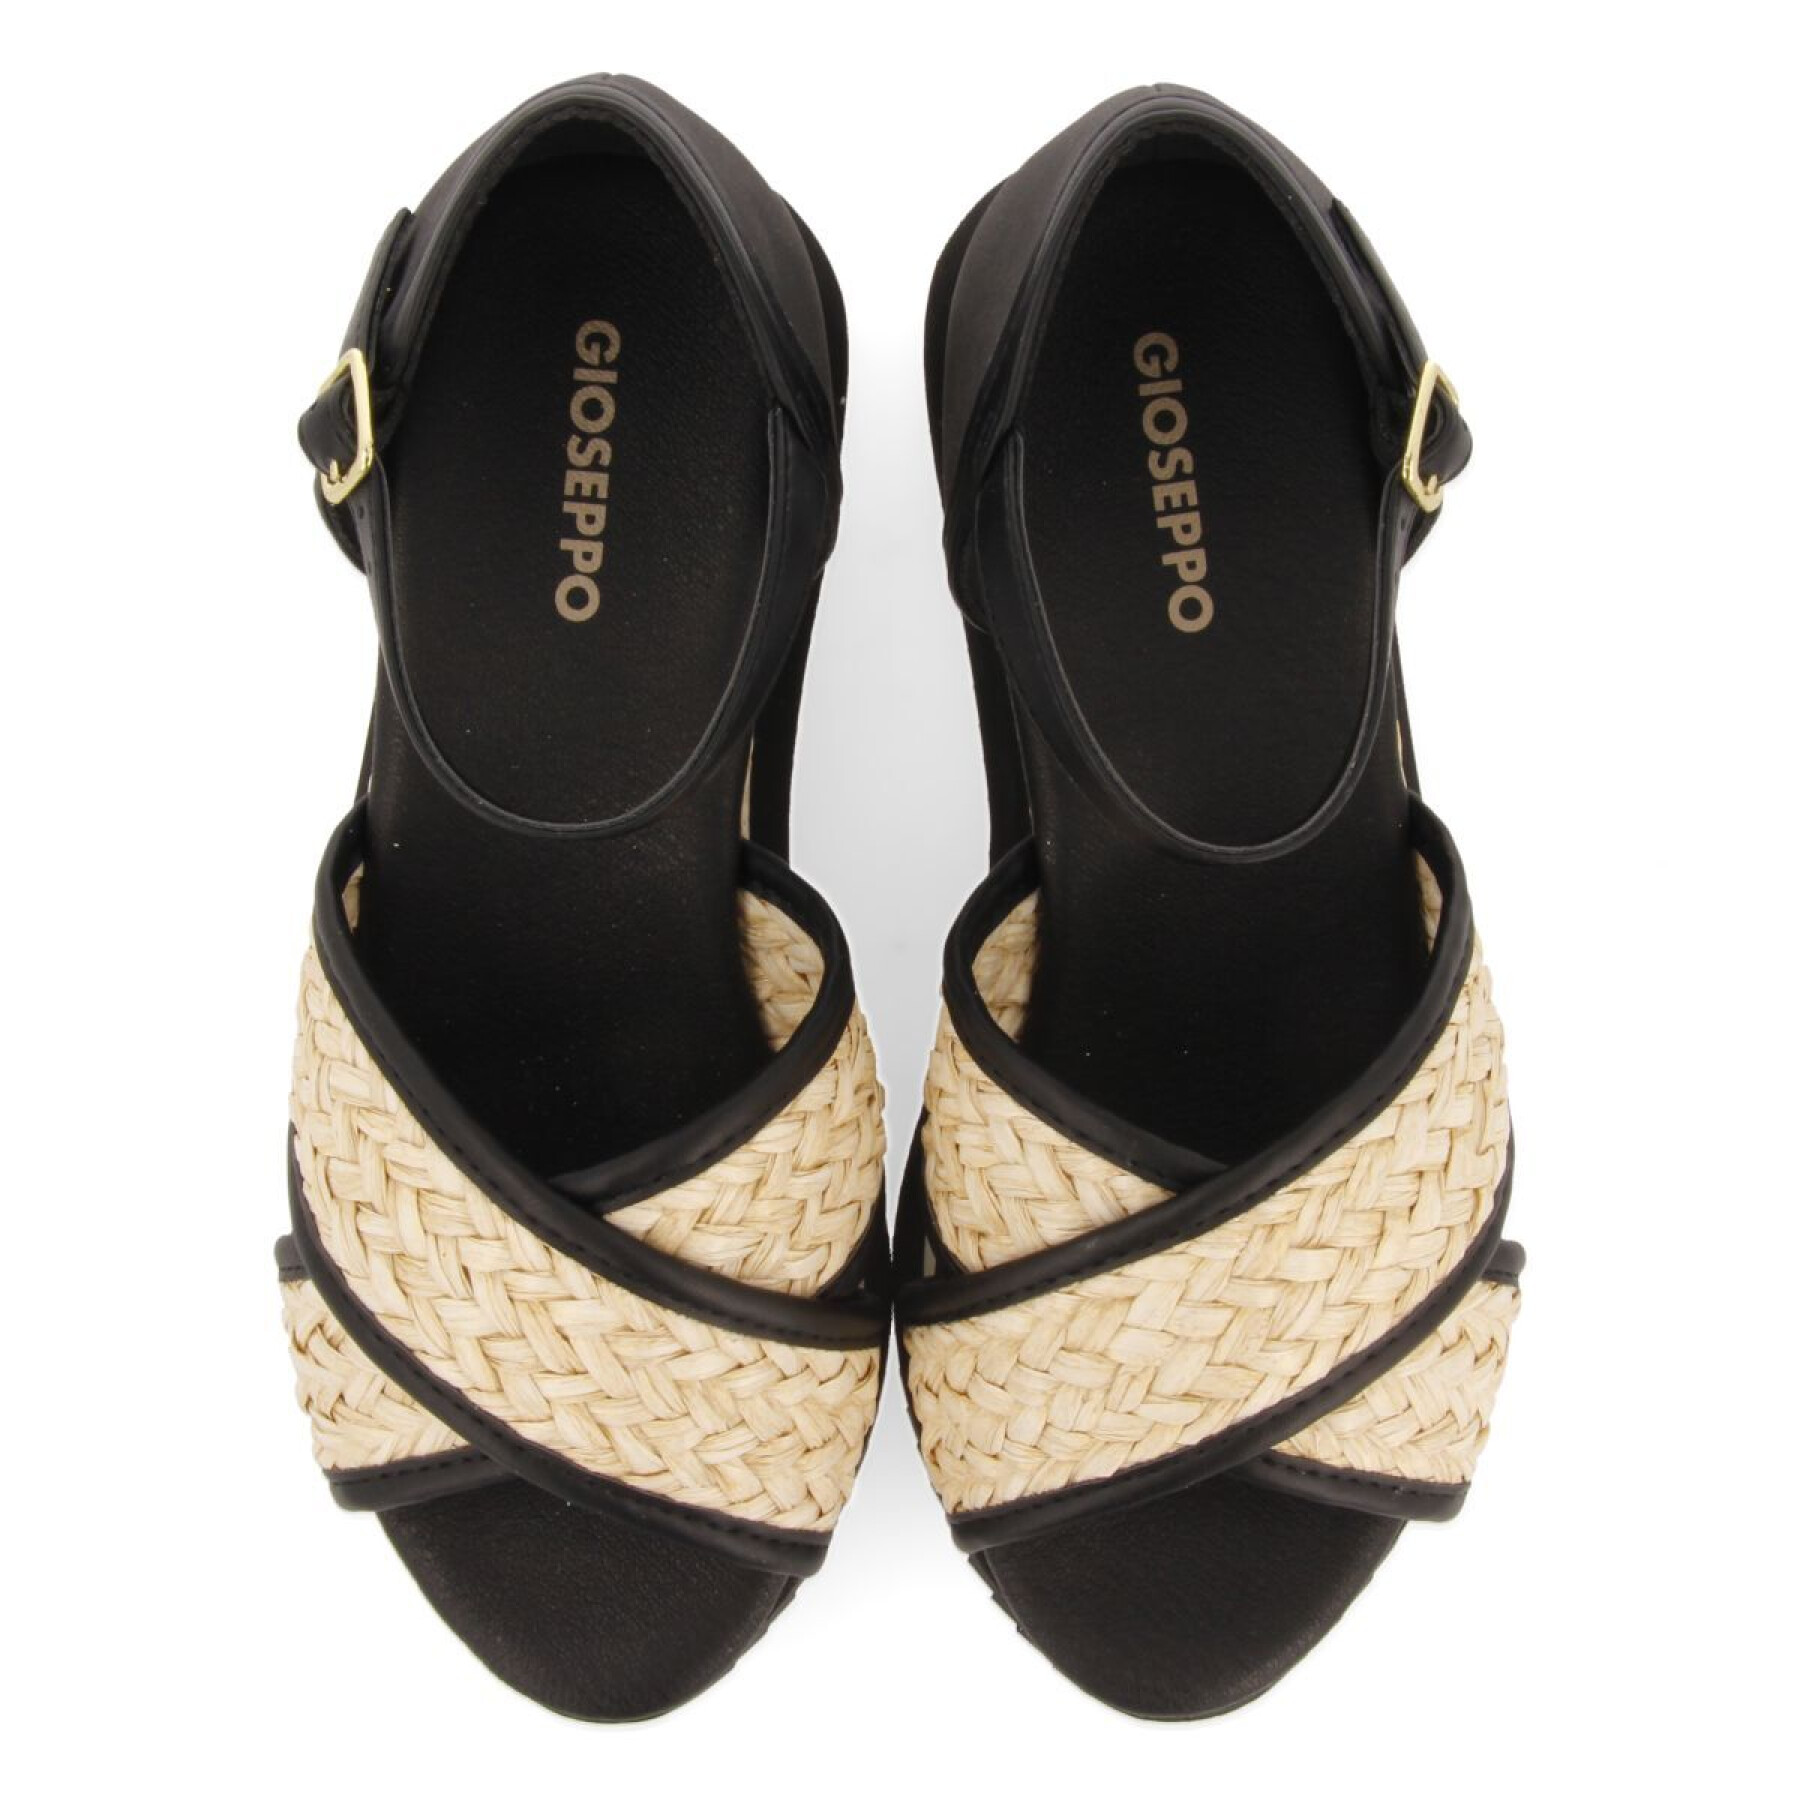 Women's wedge sandals Gioseppo Rinsey